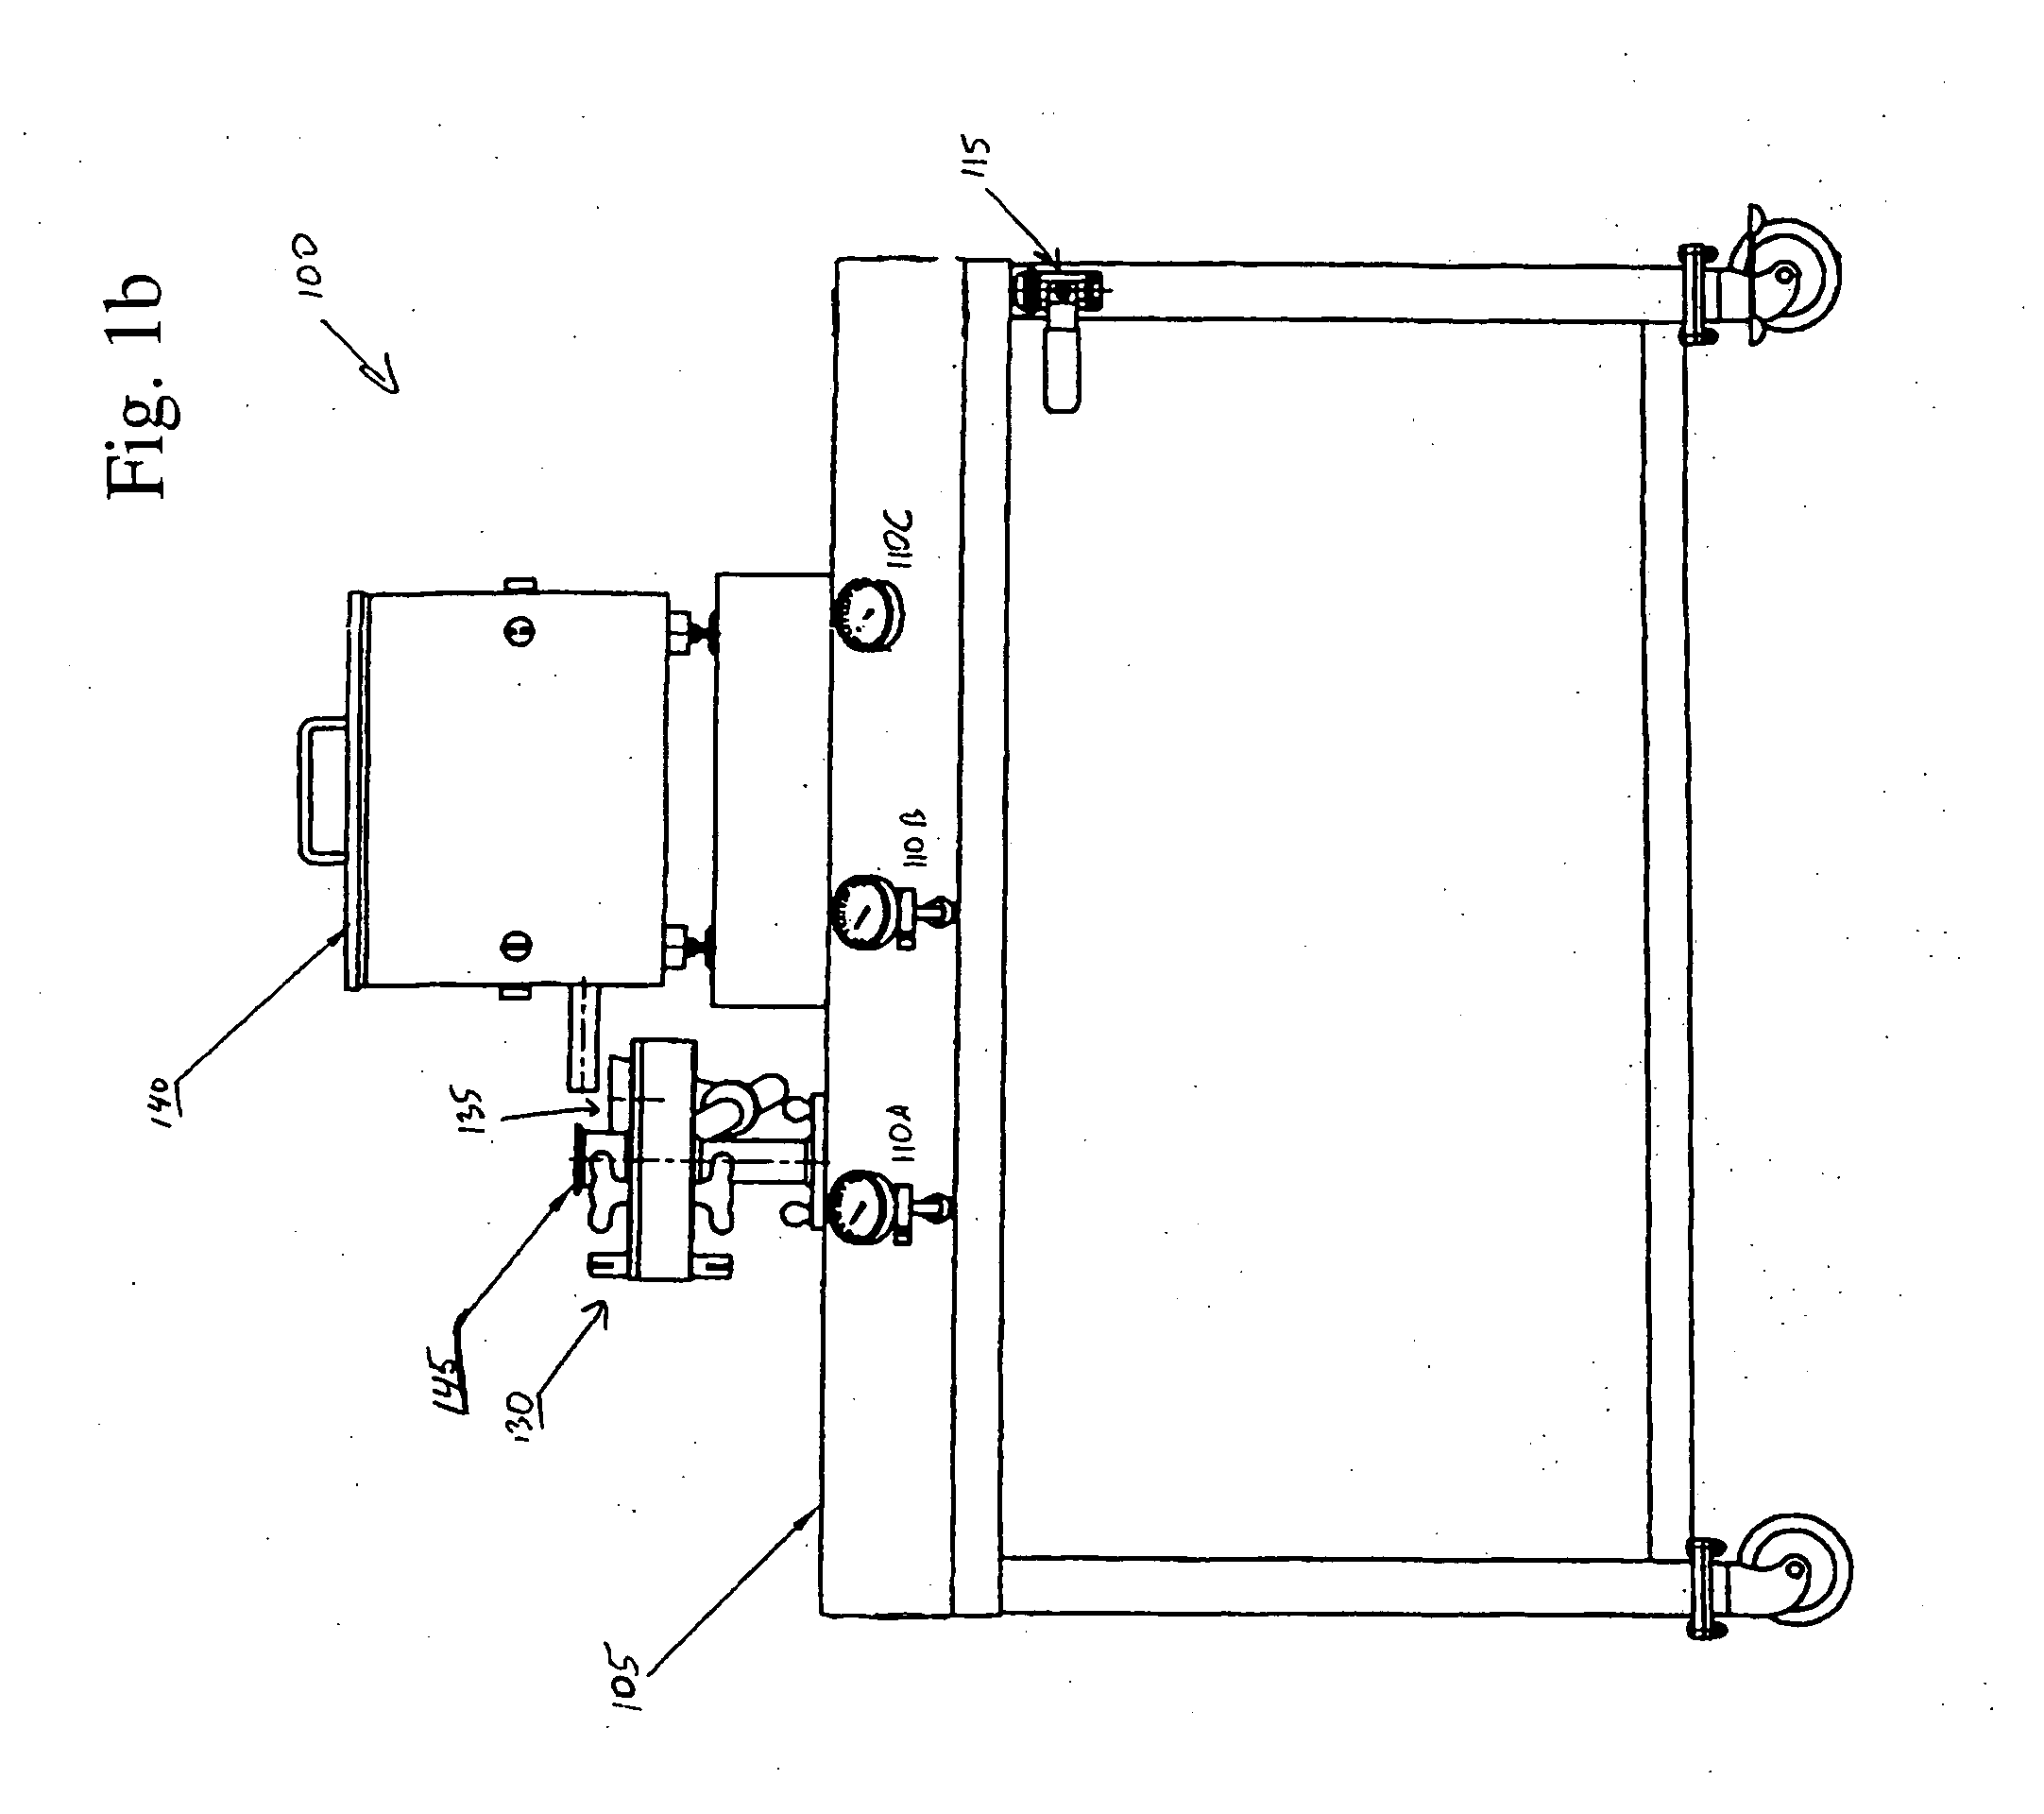 Dry particle based adhesive and dry film and methods of making same